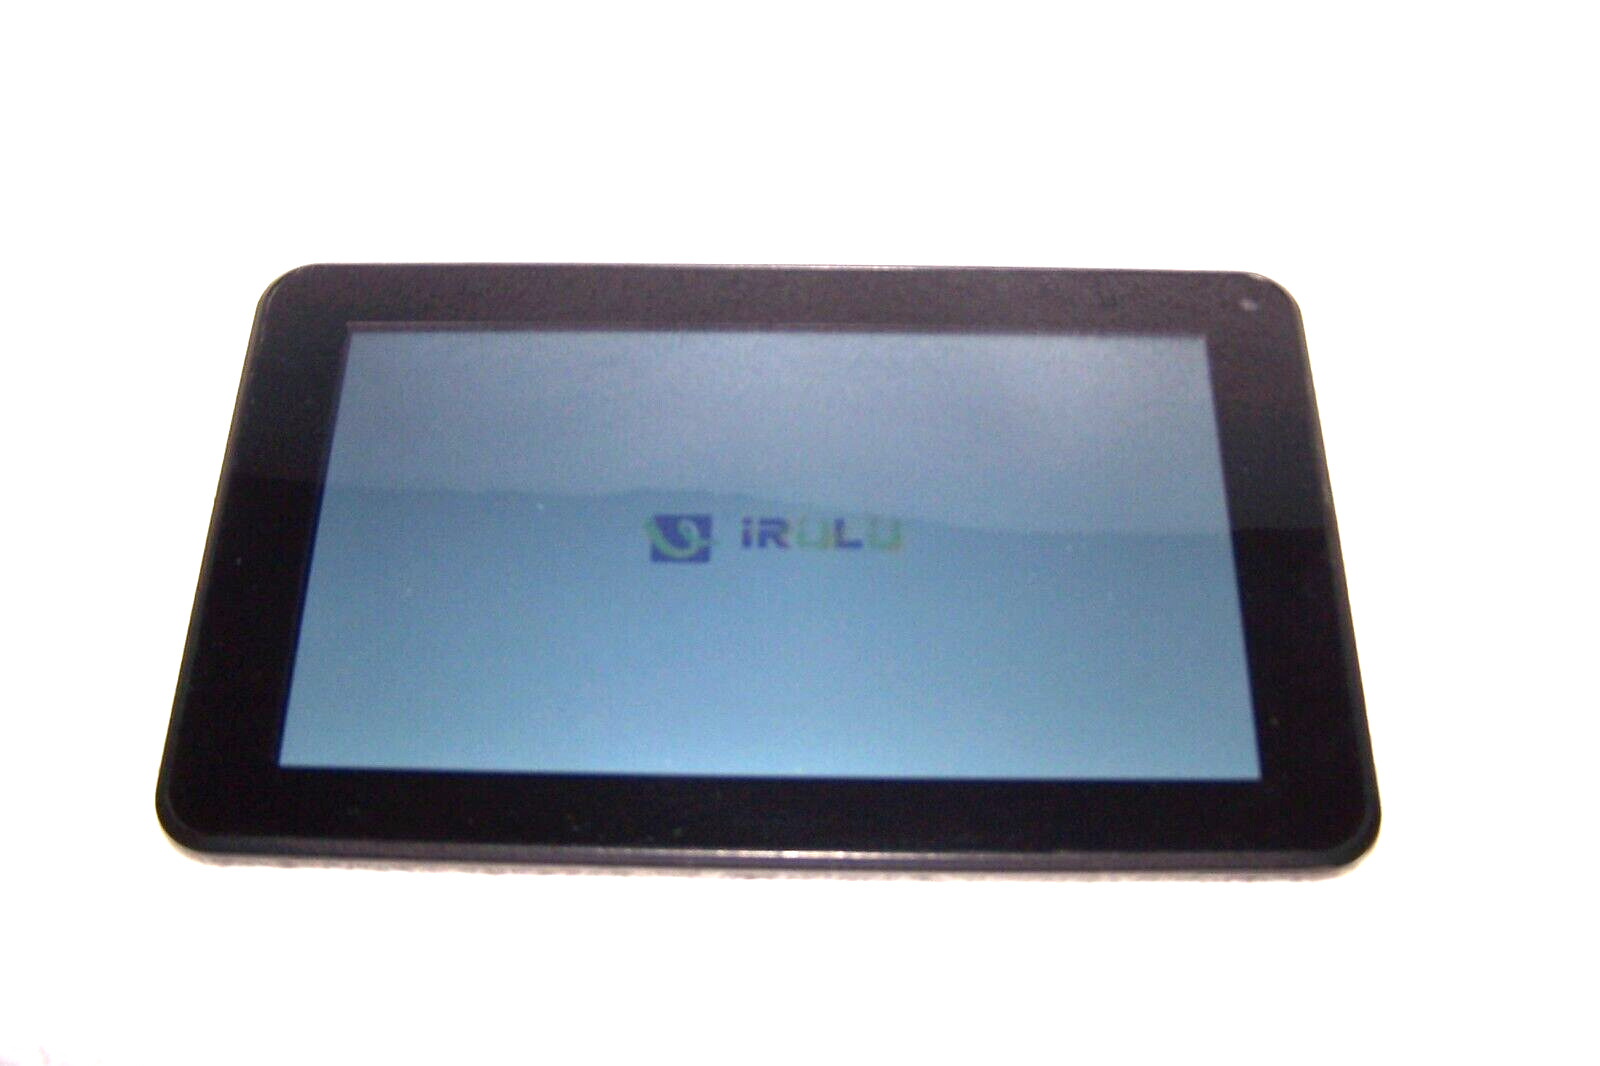 IRULU eXpro Tablet w/Charging Cord 7.5in By 4.5in